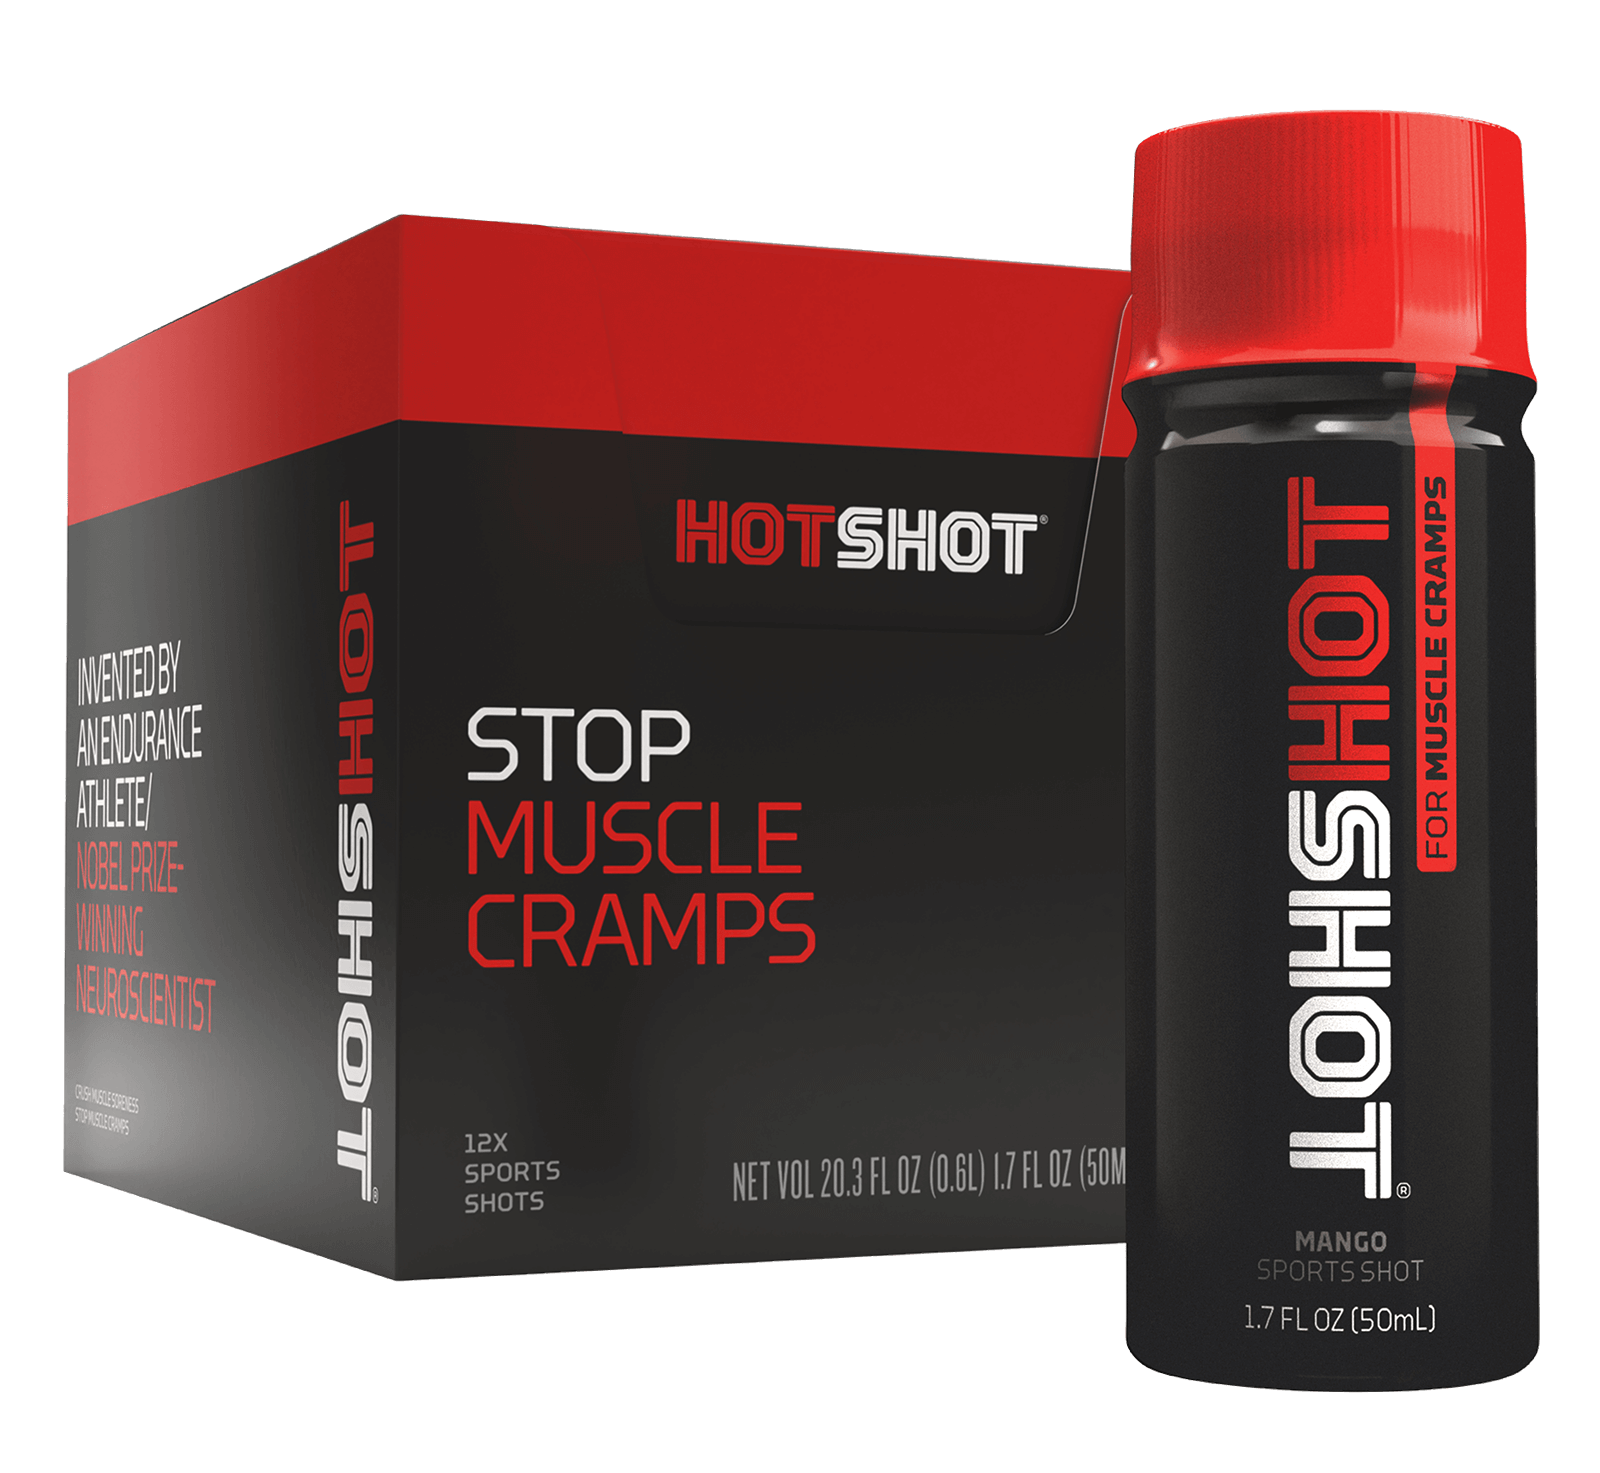 Box of Stop Muscle Cramps Shots and Bottle of HotShot